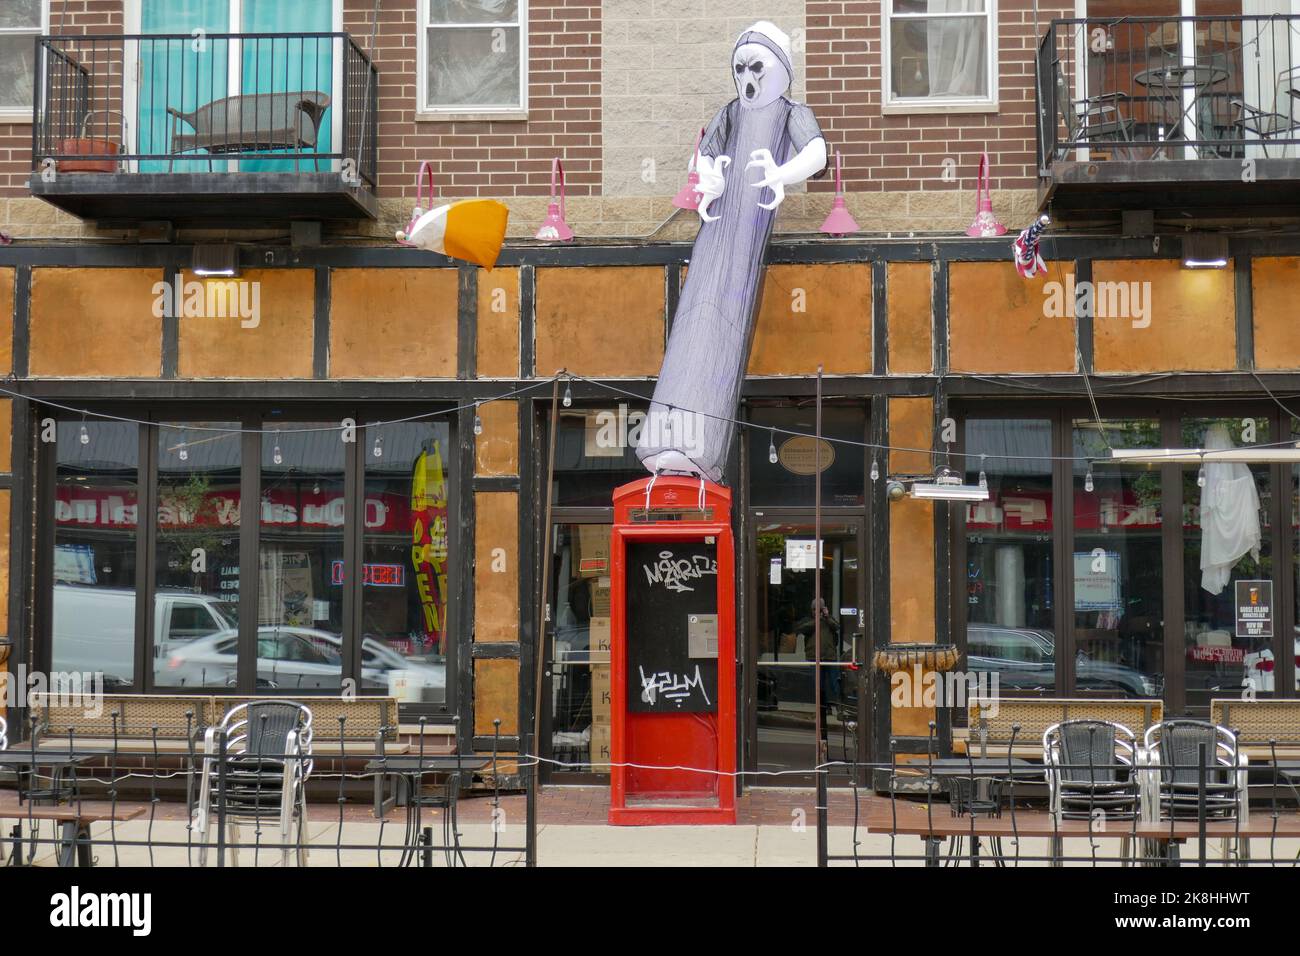 A giant ghoul decoration fastened to a British style phone booth. Wicker Park neighborhood, Chicago, Illinois. Stock Photo